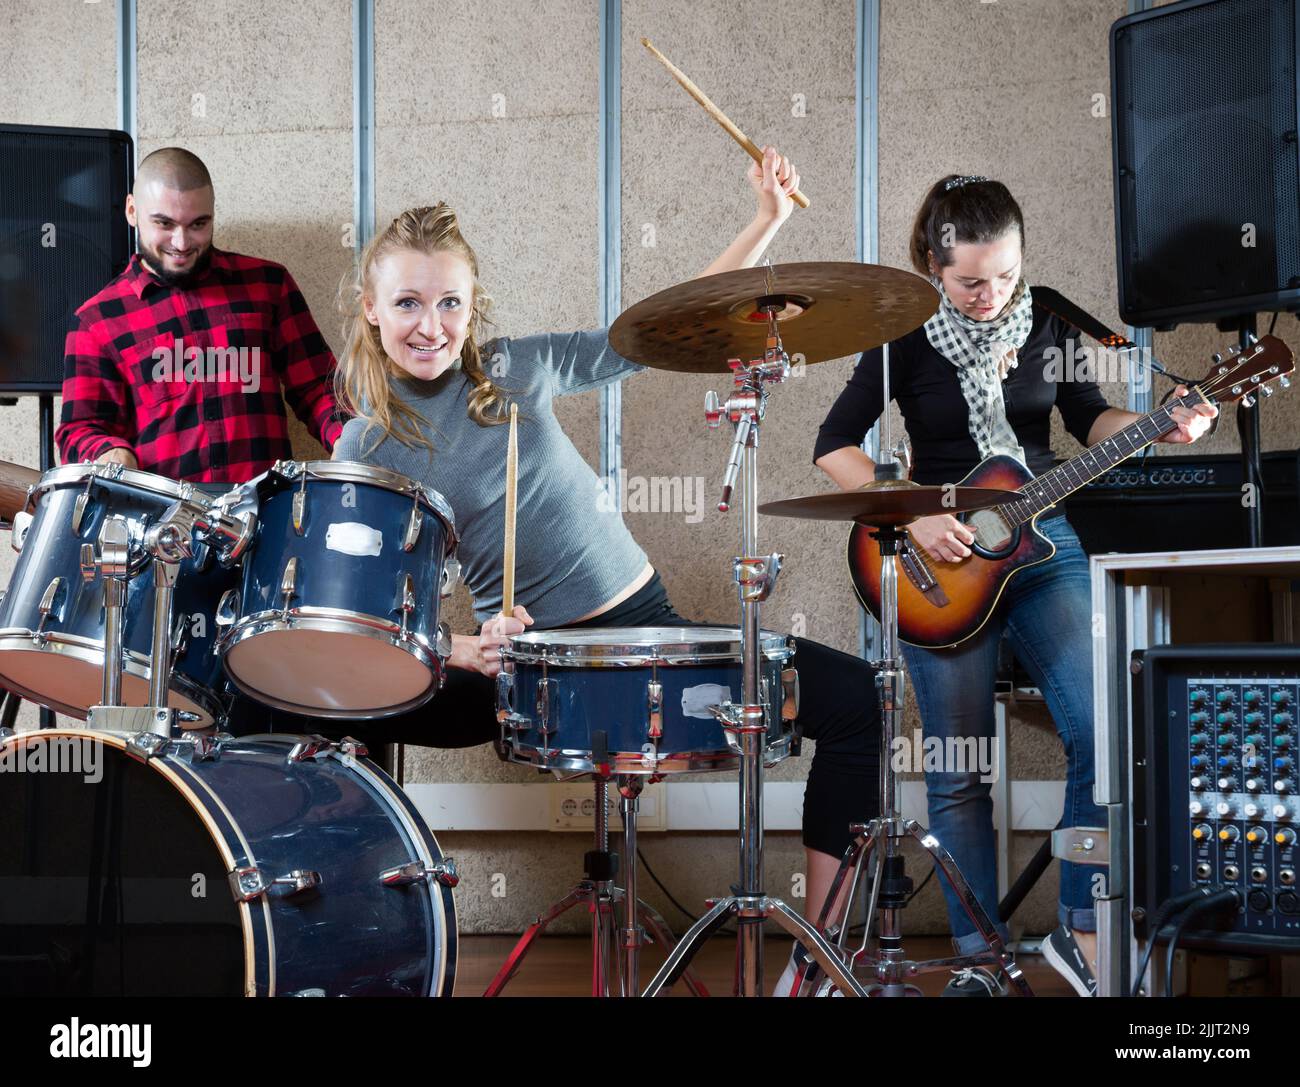 Music band with smiling girl drummer rehearsing Stock Photo